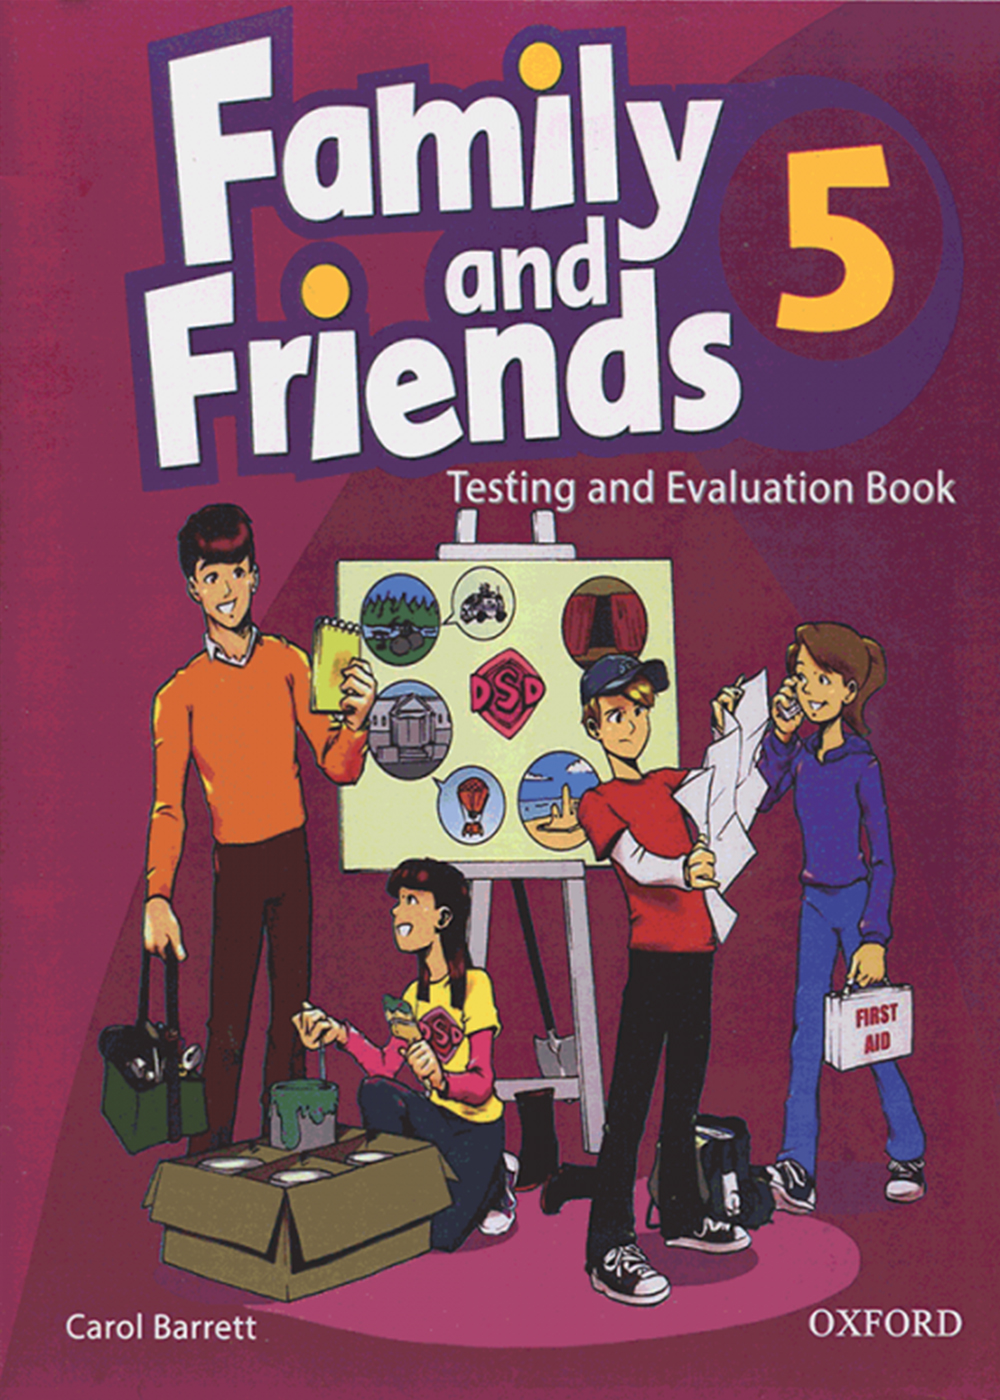 Friends tests. Family and friends 5 Testing and evaluation book. Фэмили френдс 5. Family and friends 5 Workbook. Oxford Family and friends 5 класс.